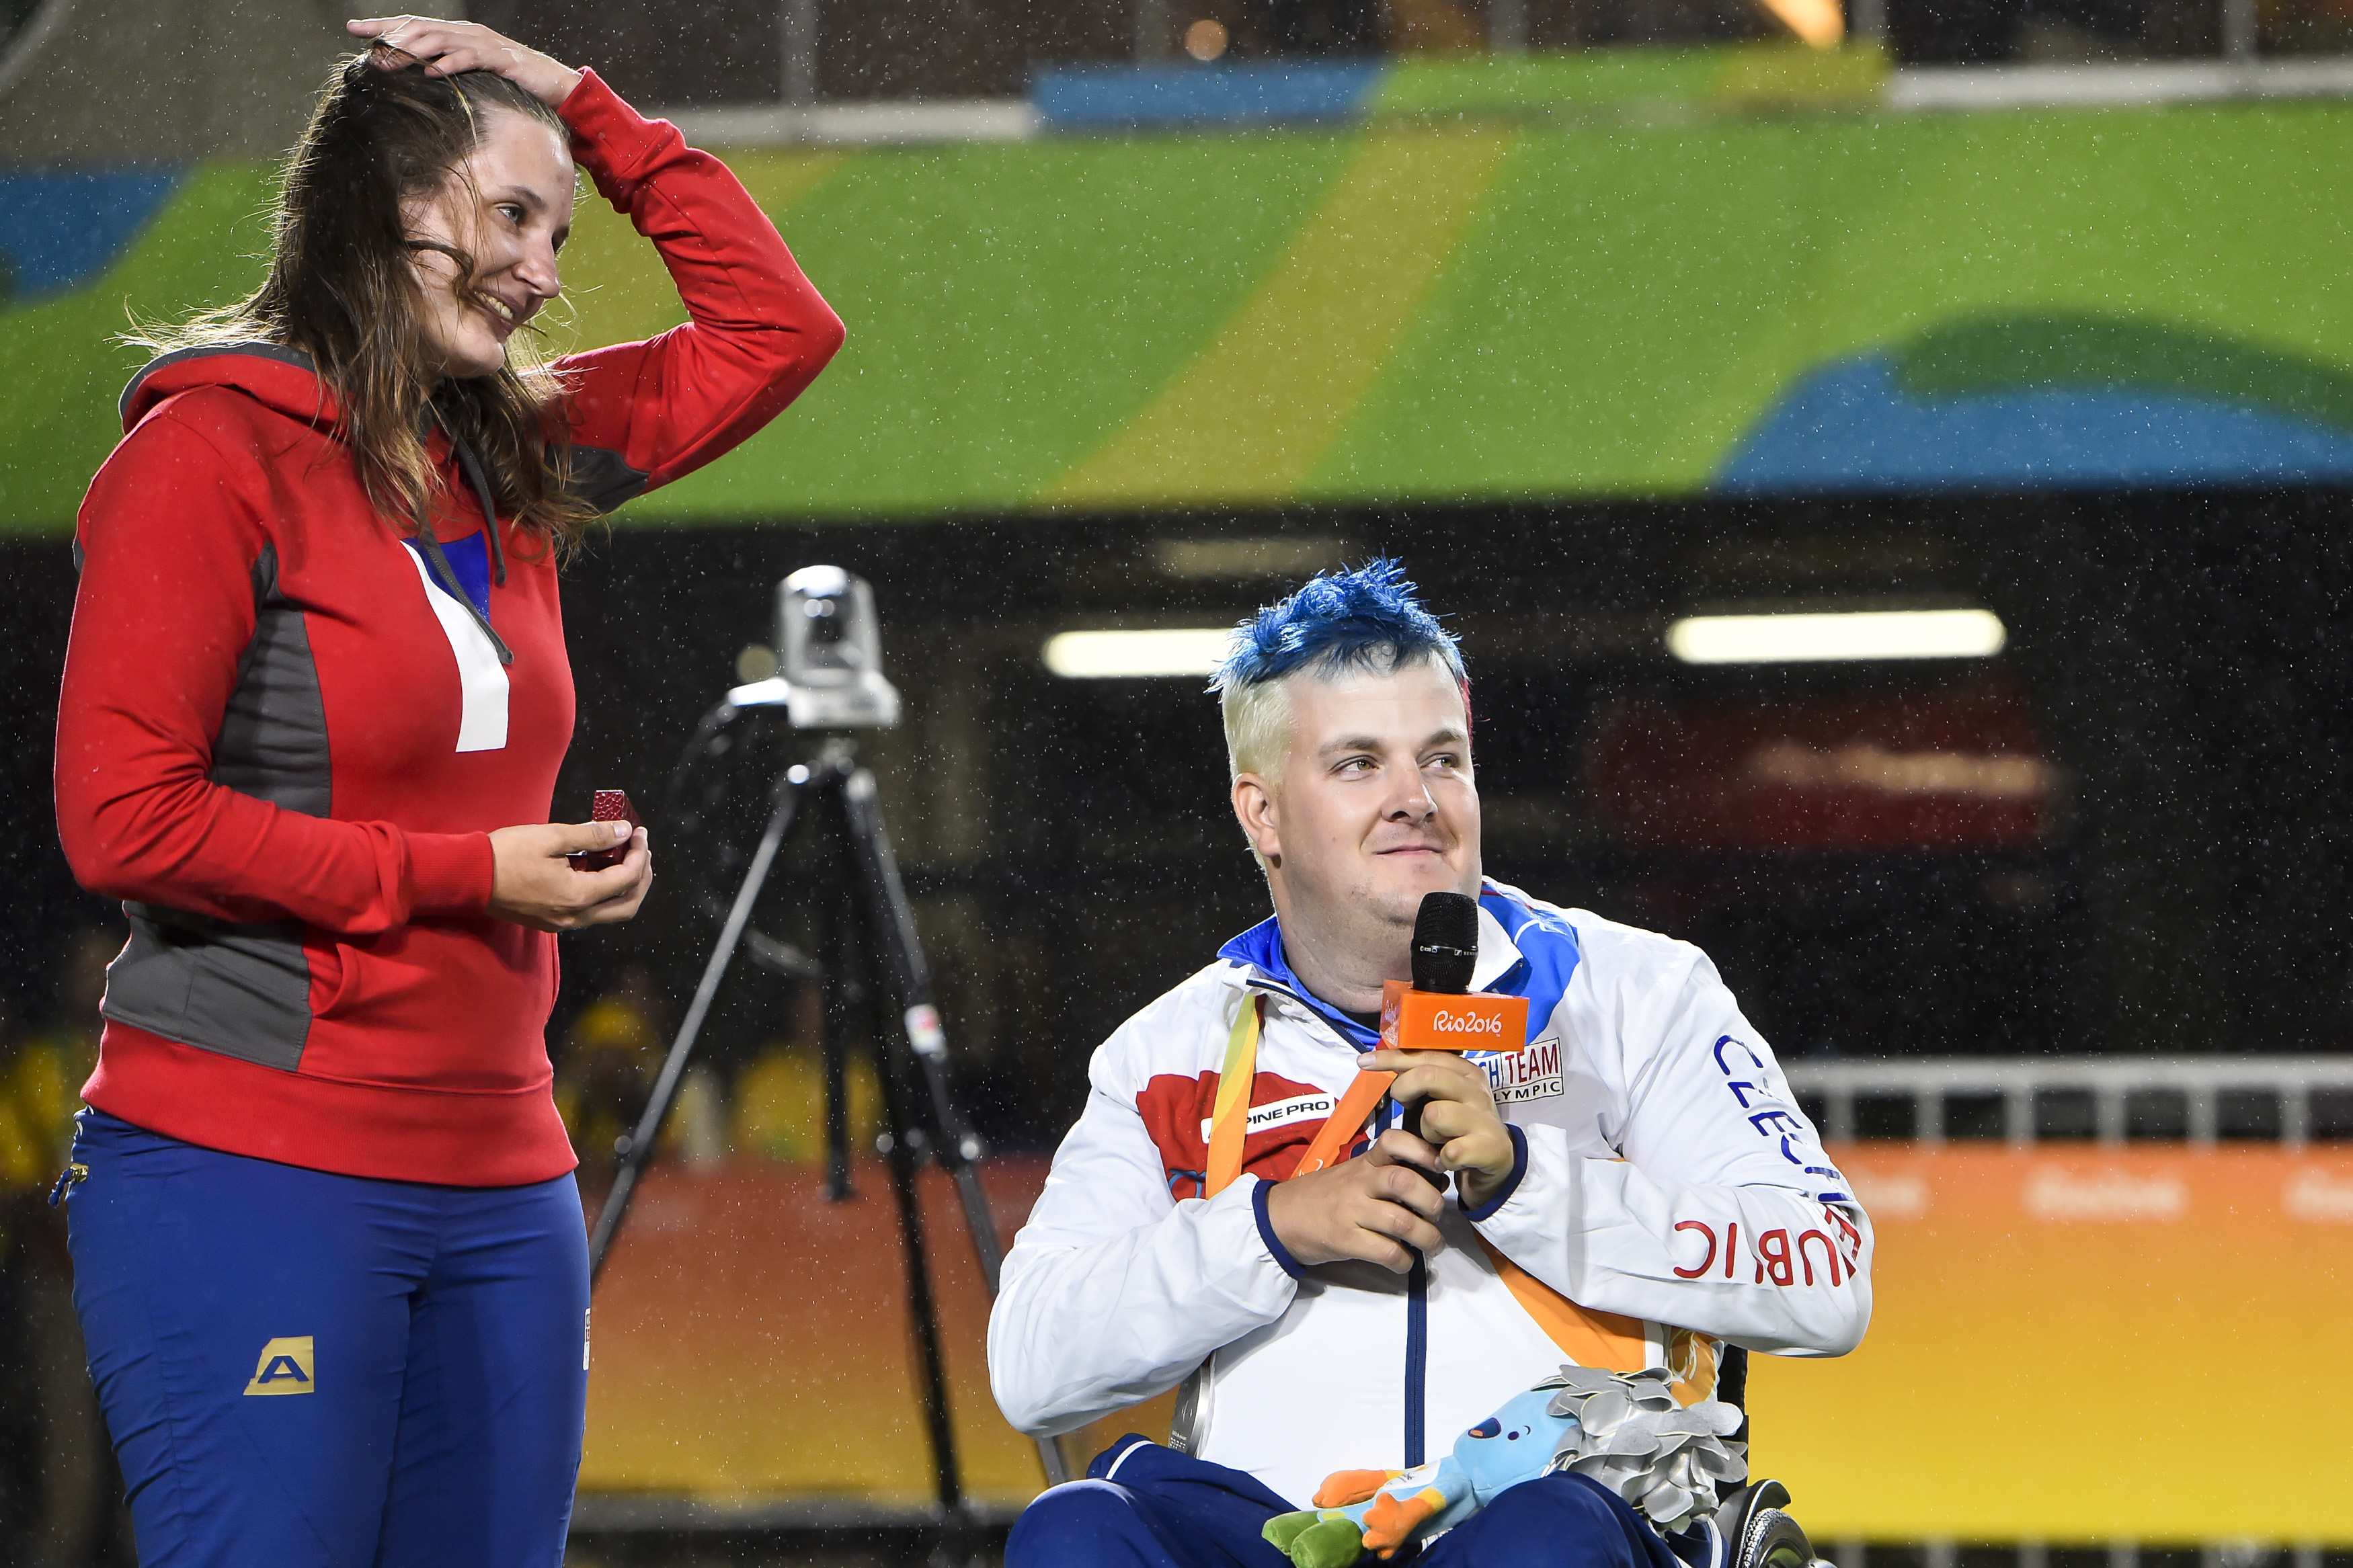 Silver medalist David Drahoninsky of the Czech Republic proposes to his girlfried Lida Fikarova after the medal ceremony for the men's individual archery W1 final atthe Rio 2016 Paralympic Games.